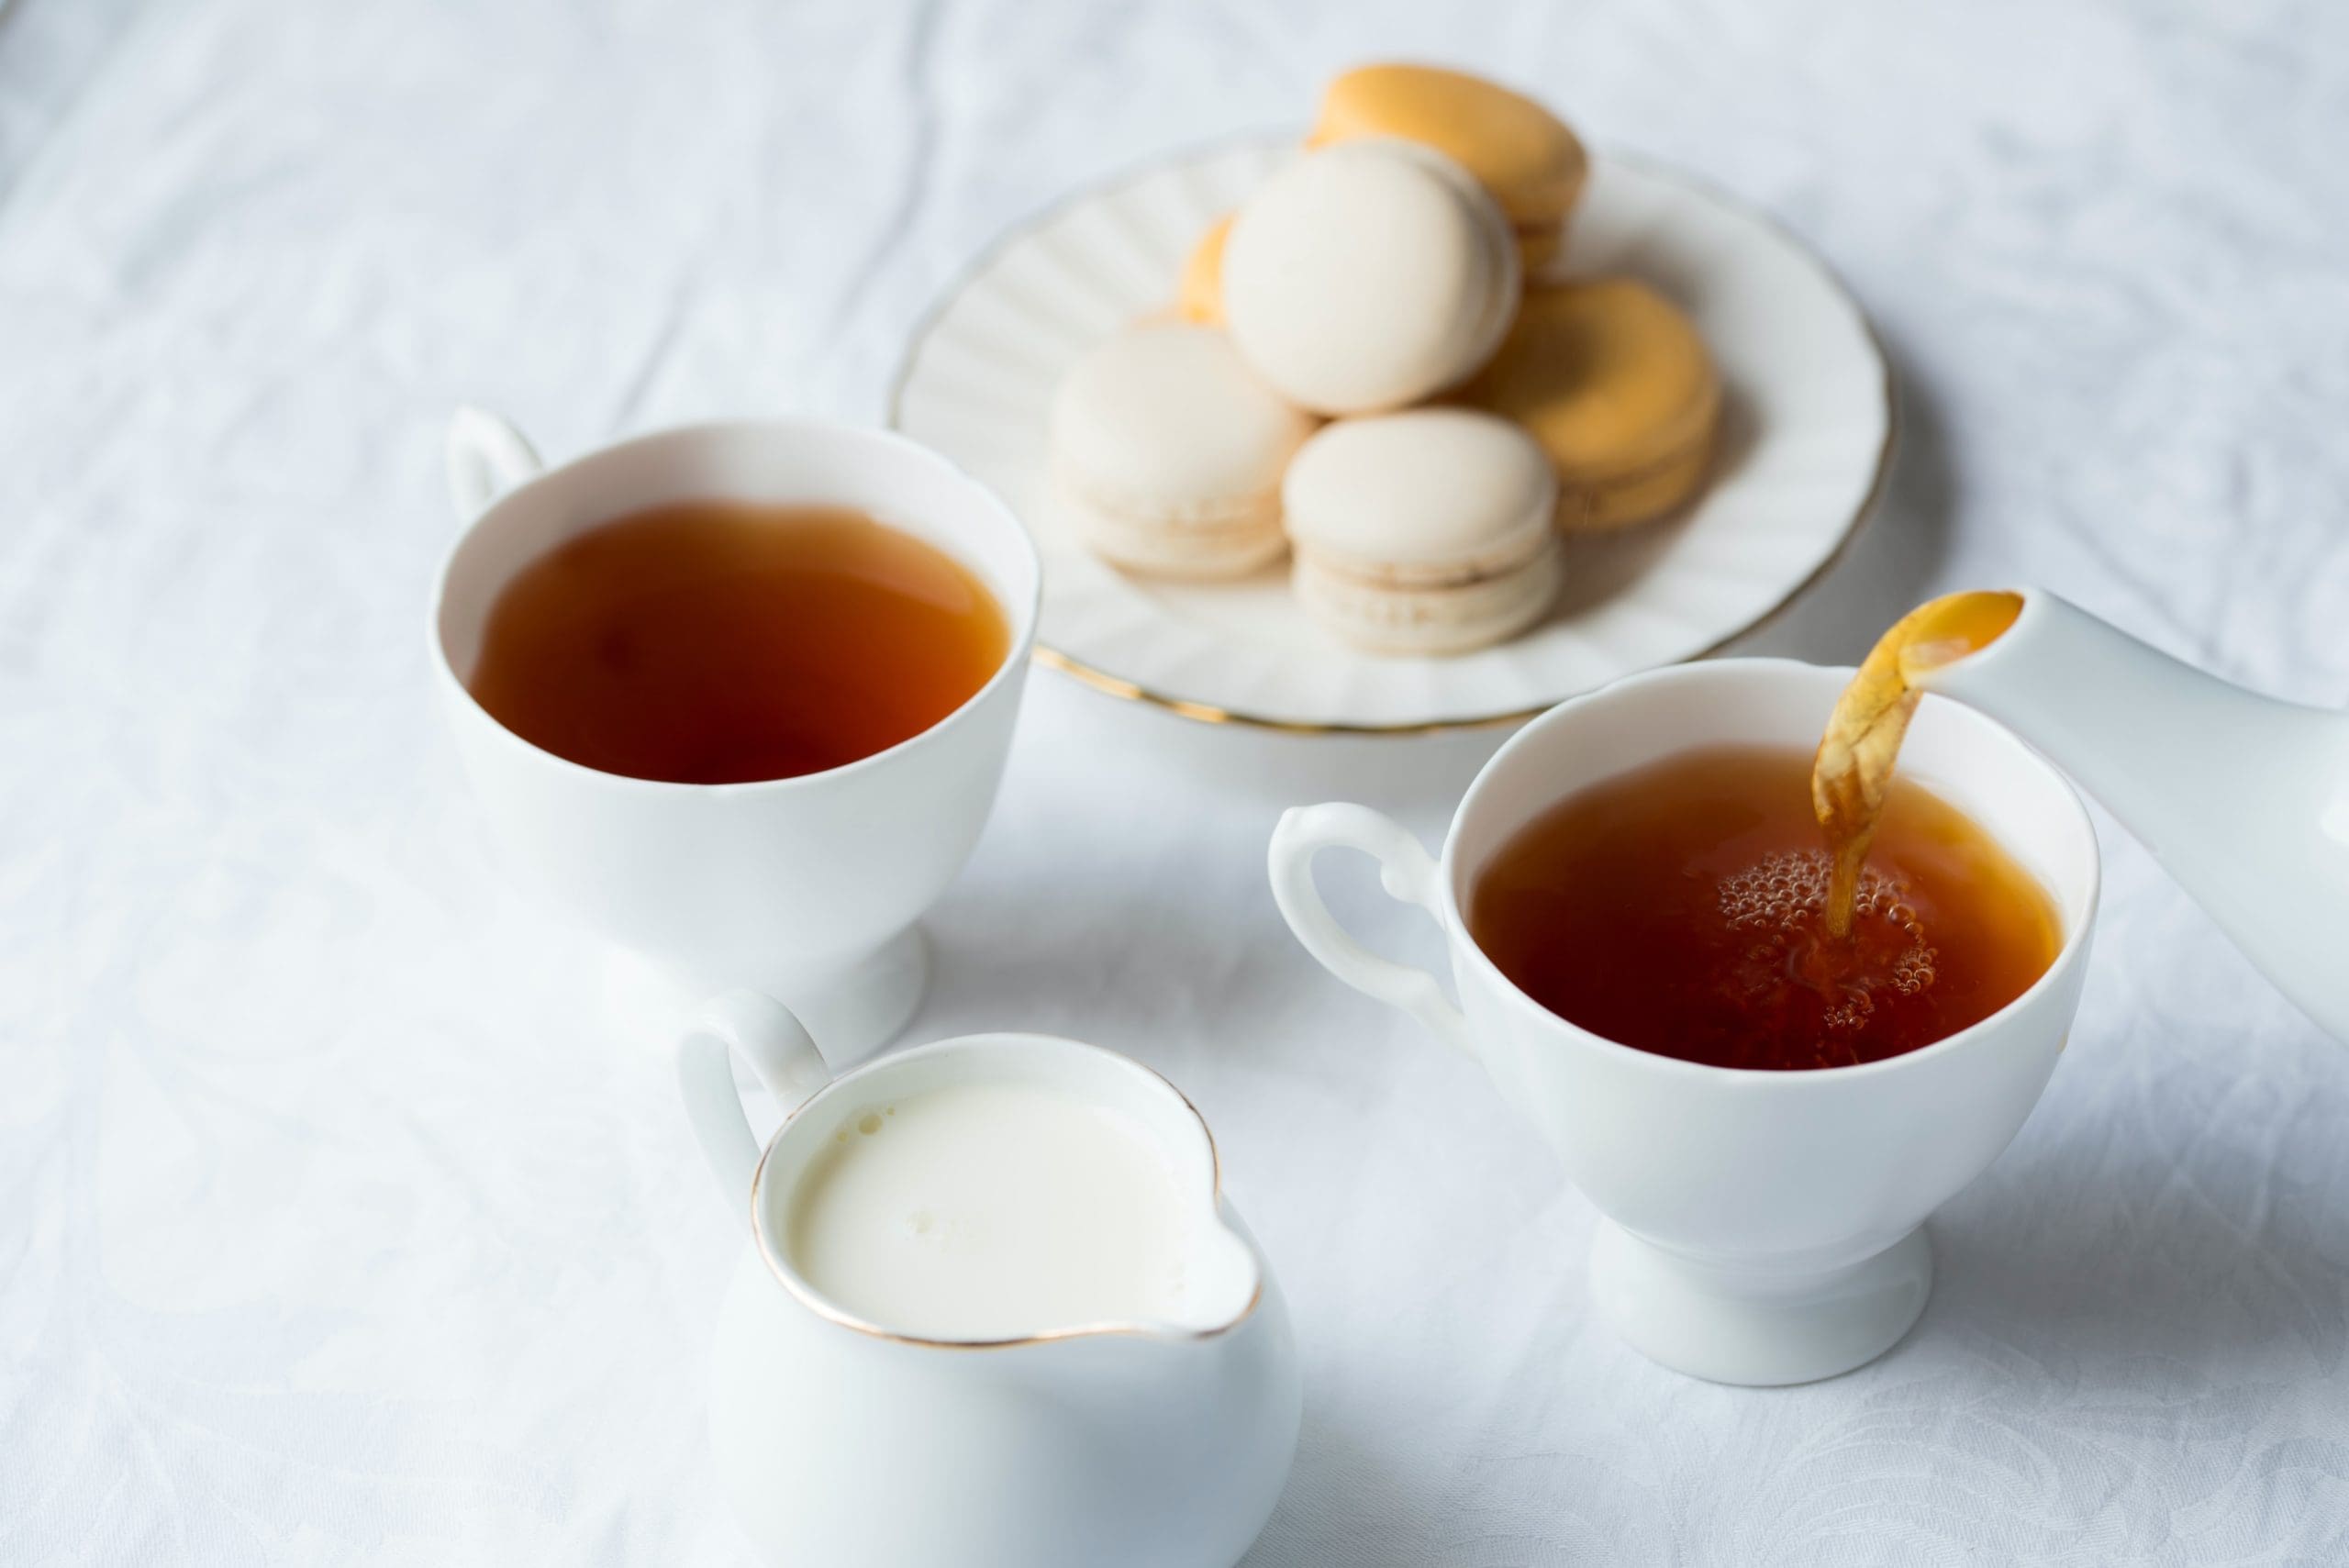 Two cups of tea with creamer and macarons